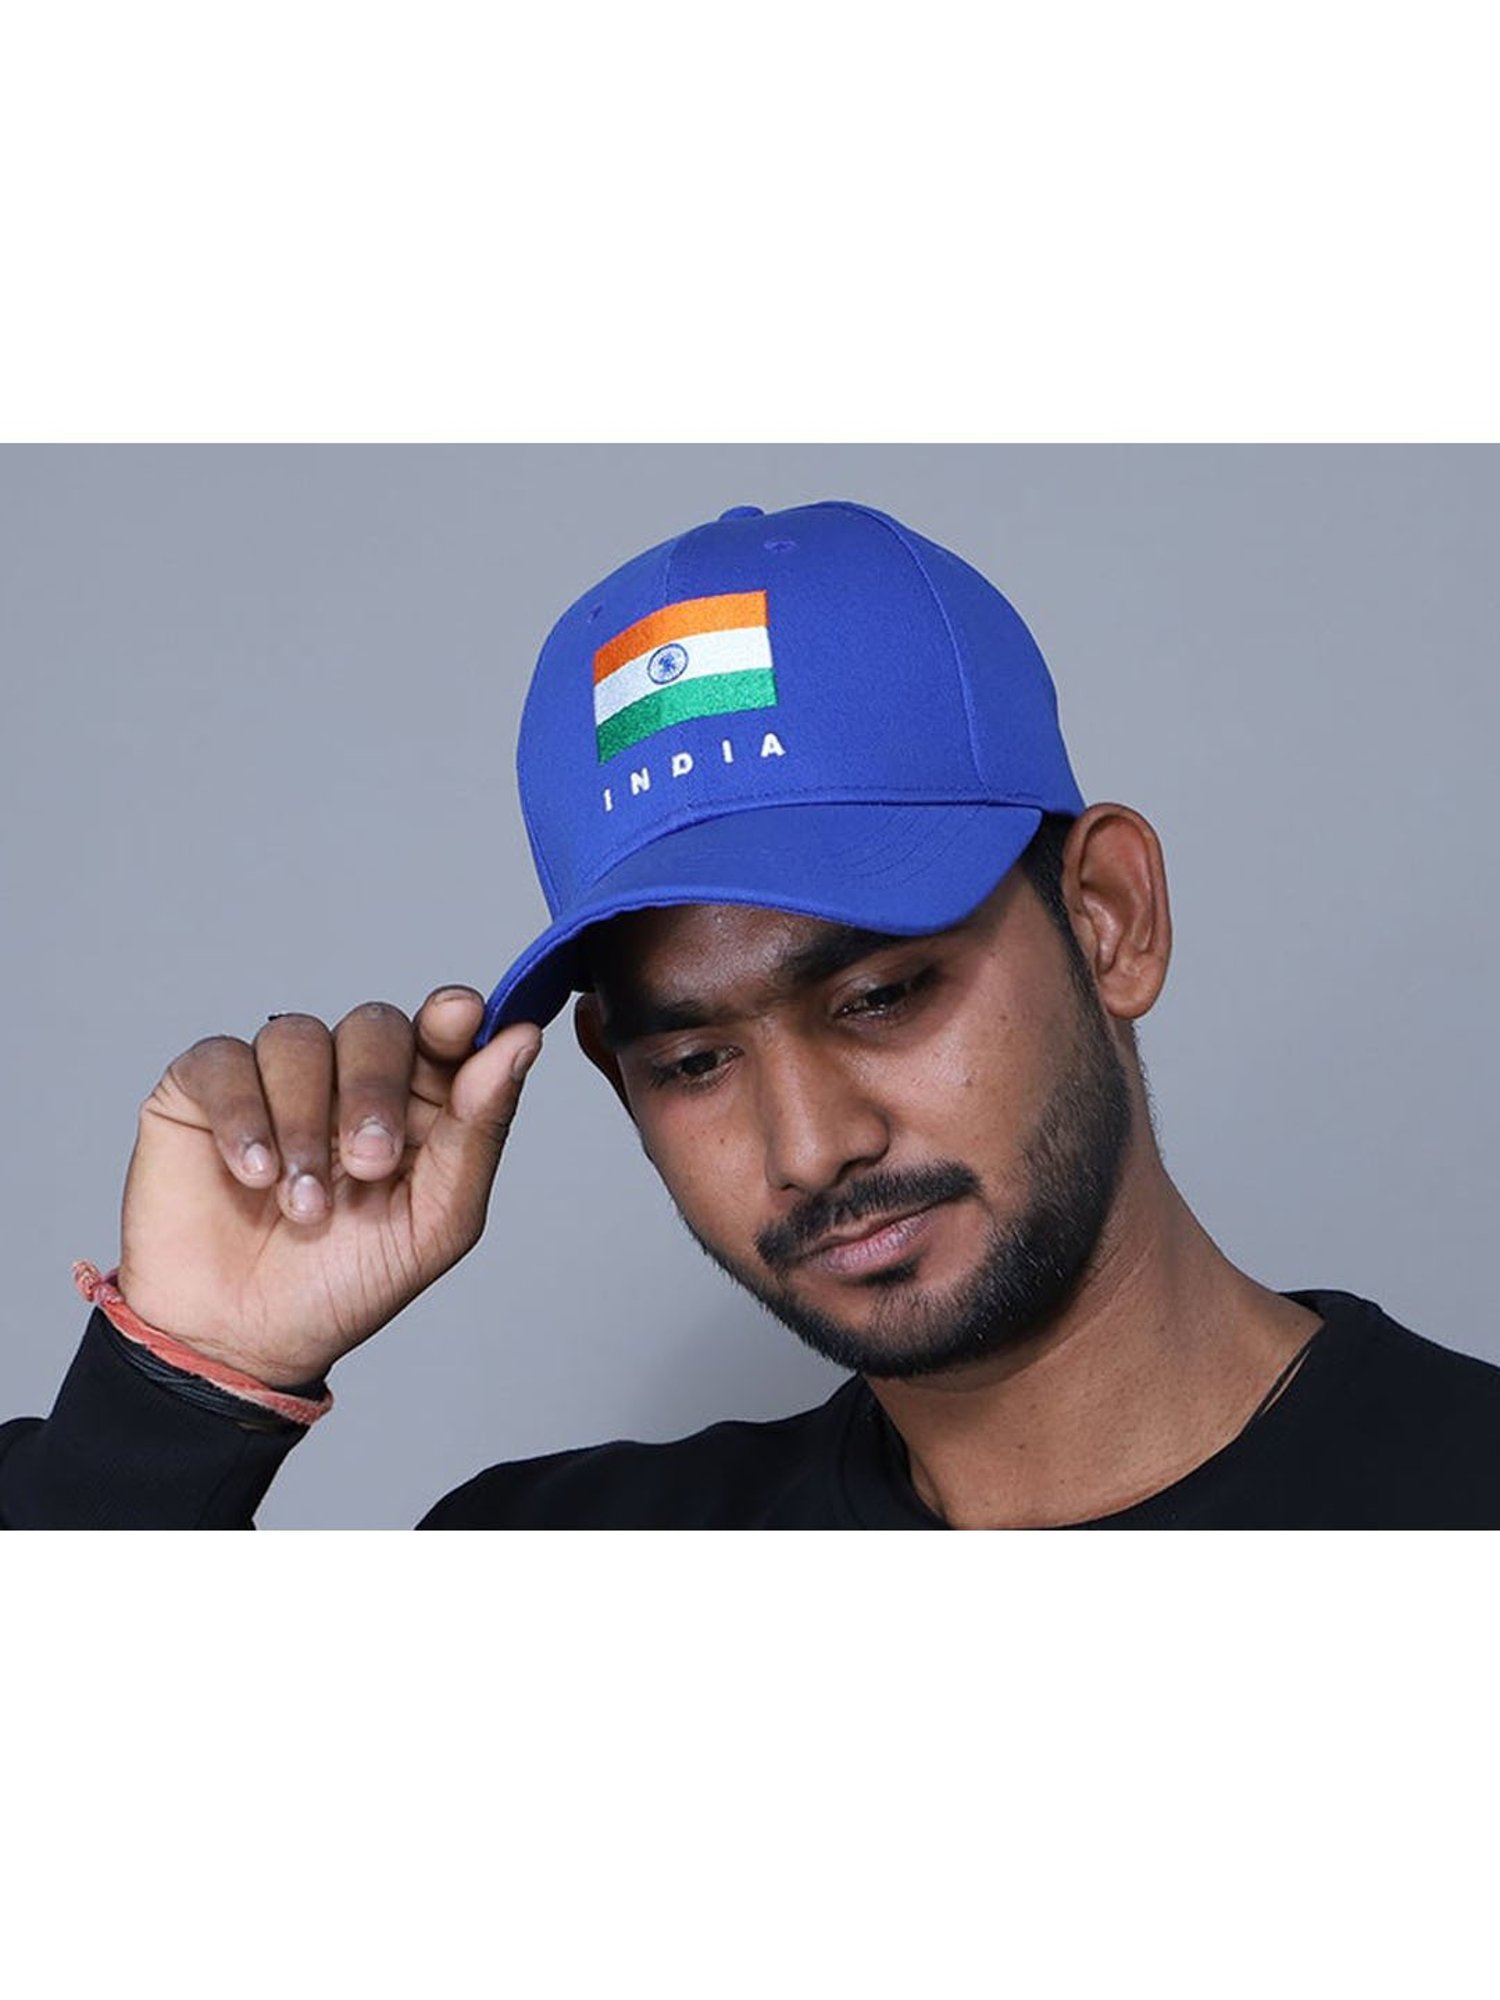 Buy Indic Inspirations Royal Blue Caps Set With Indian National Flag  Logo(Pack of 2)Online@Tata CLiQ